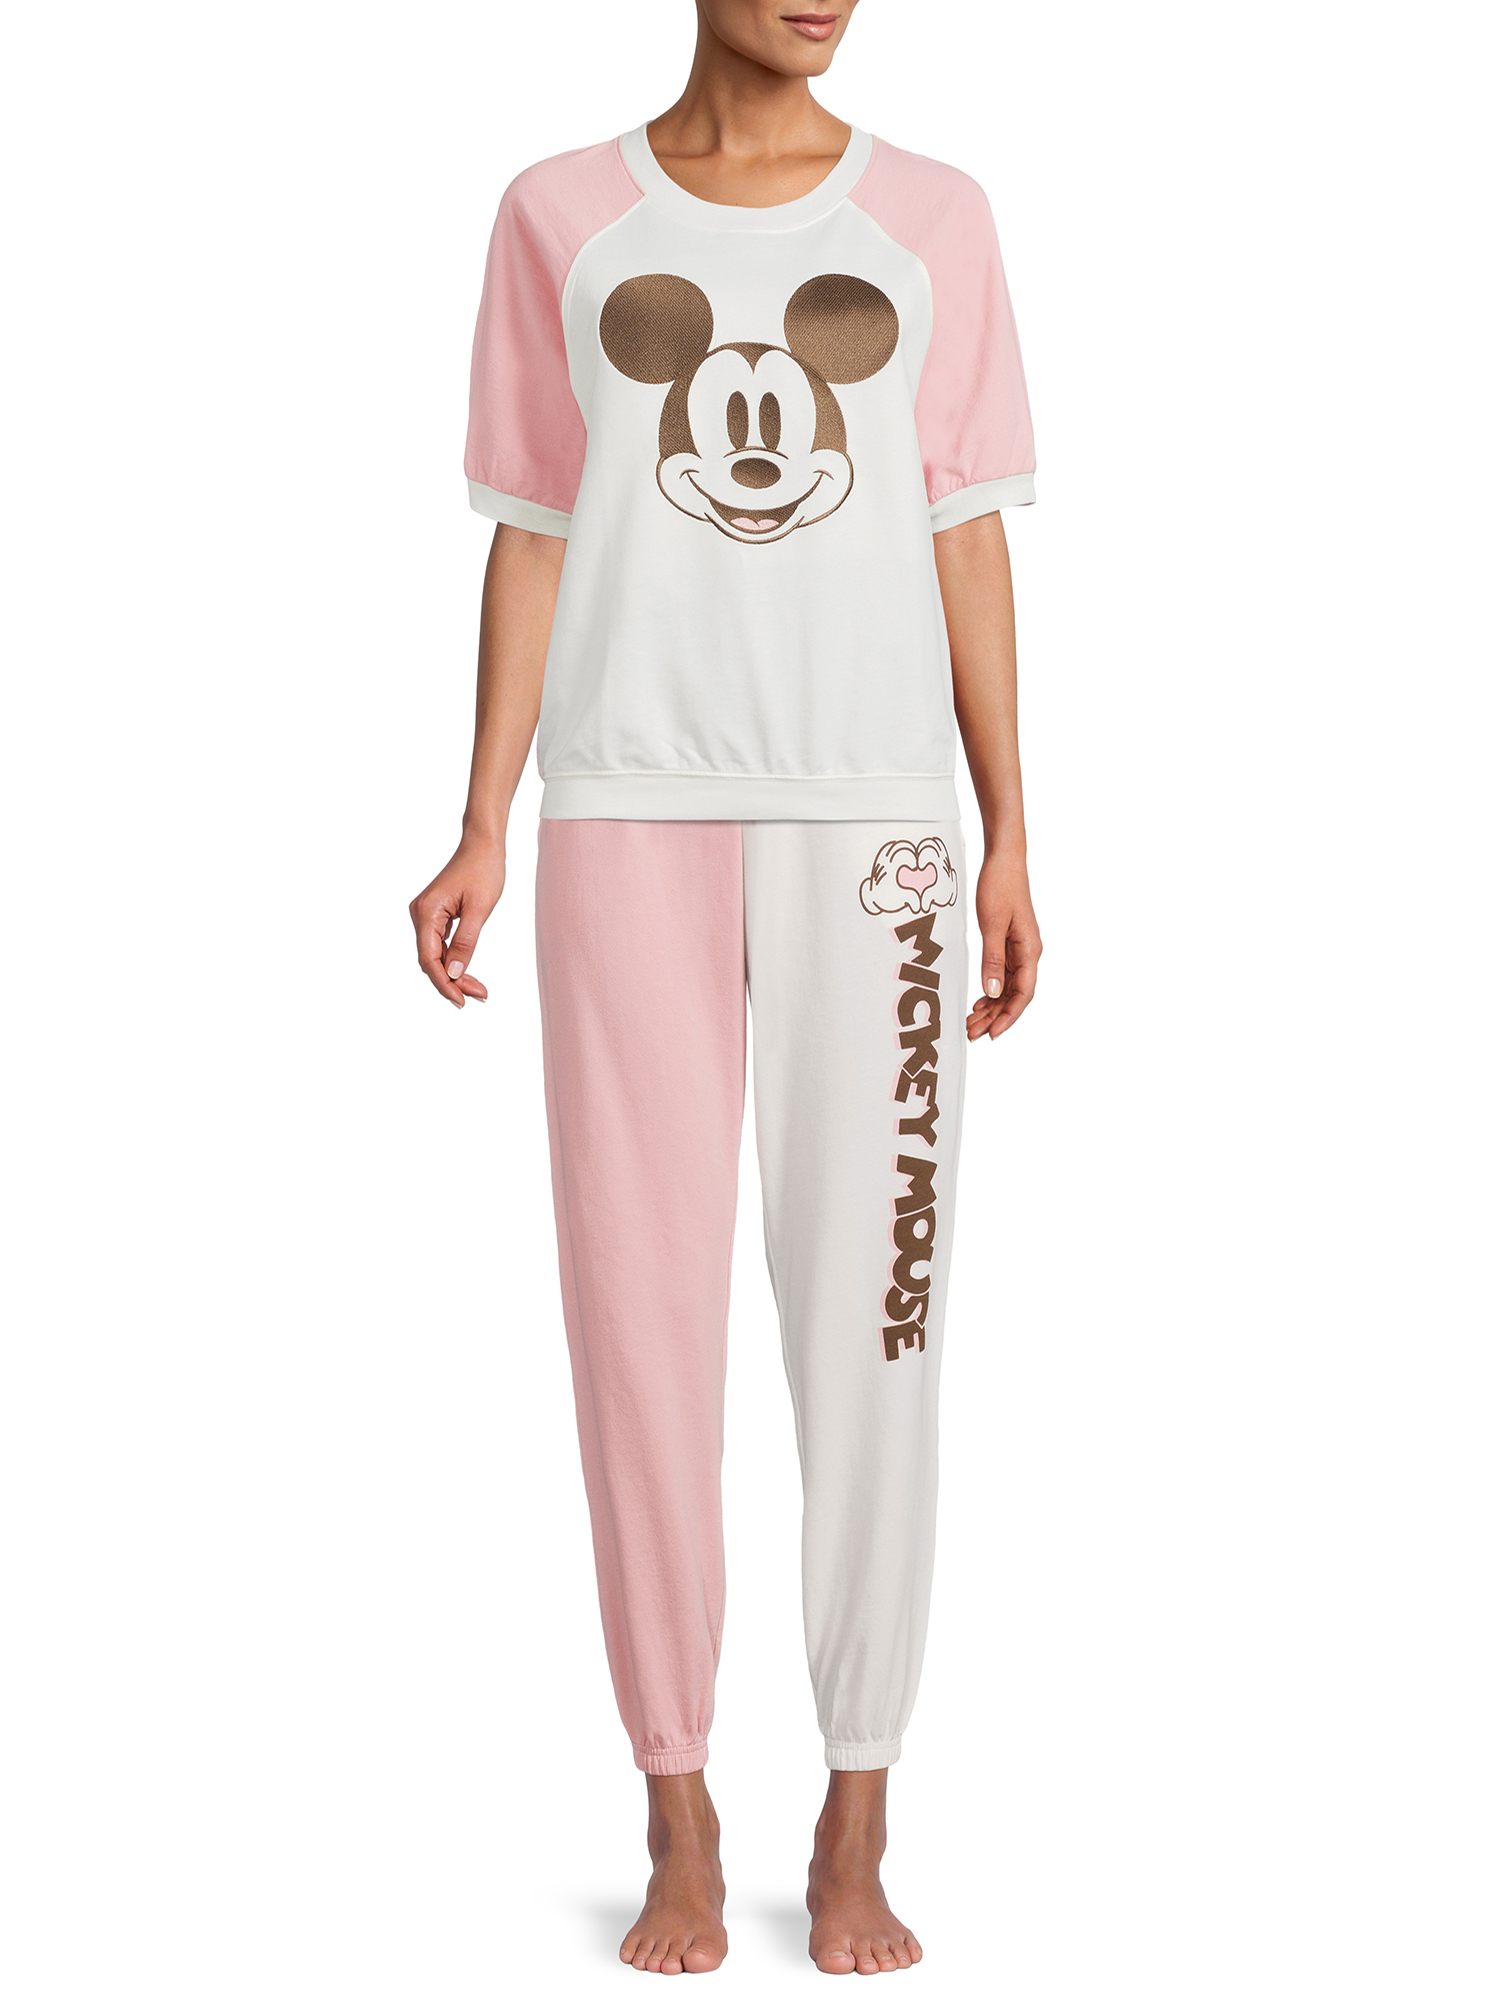 Disney Women's and Women's Plus Mickey Mouse Jogger Pants - image 2 of 5